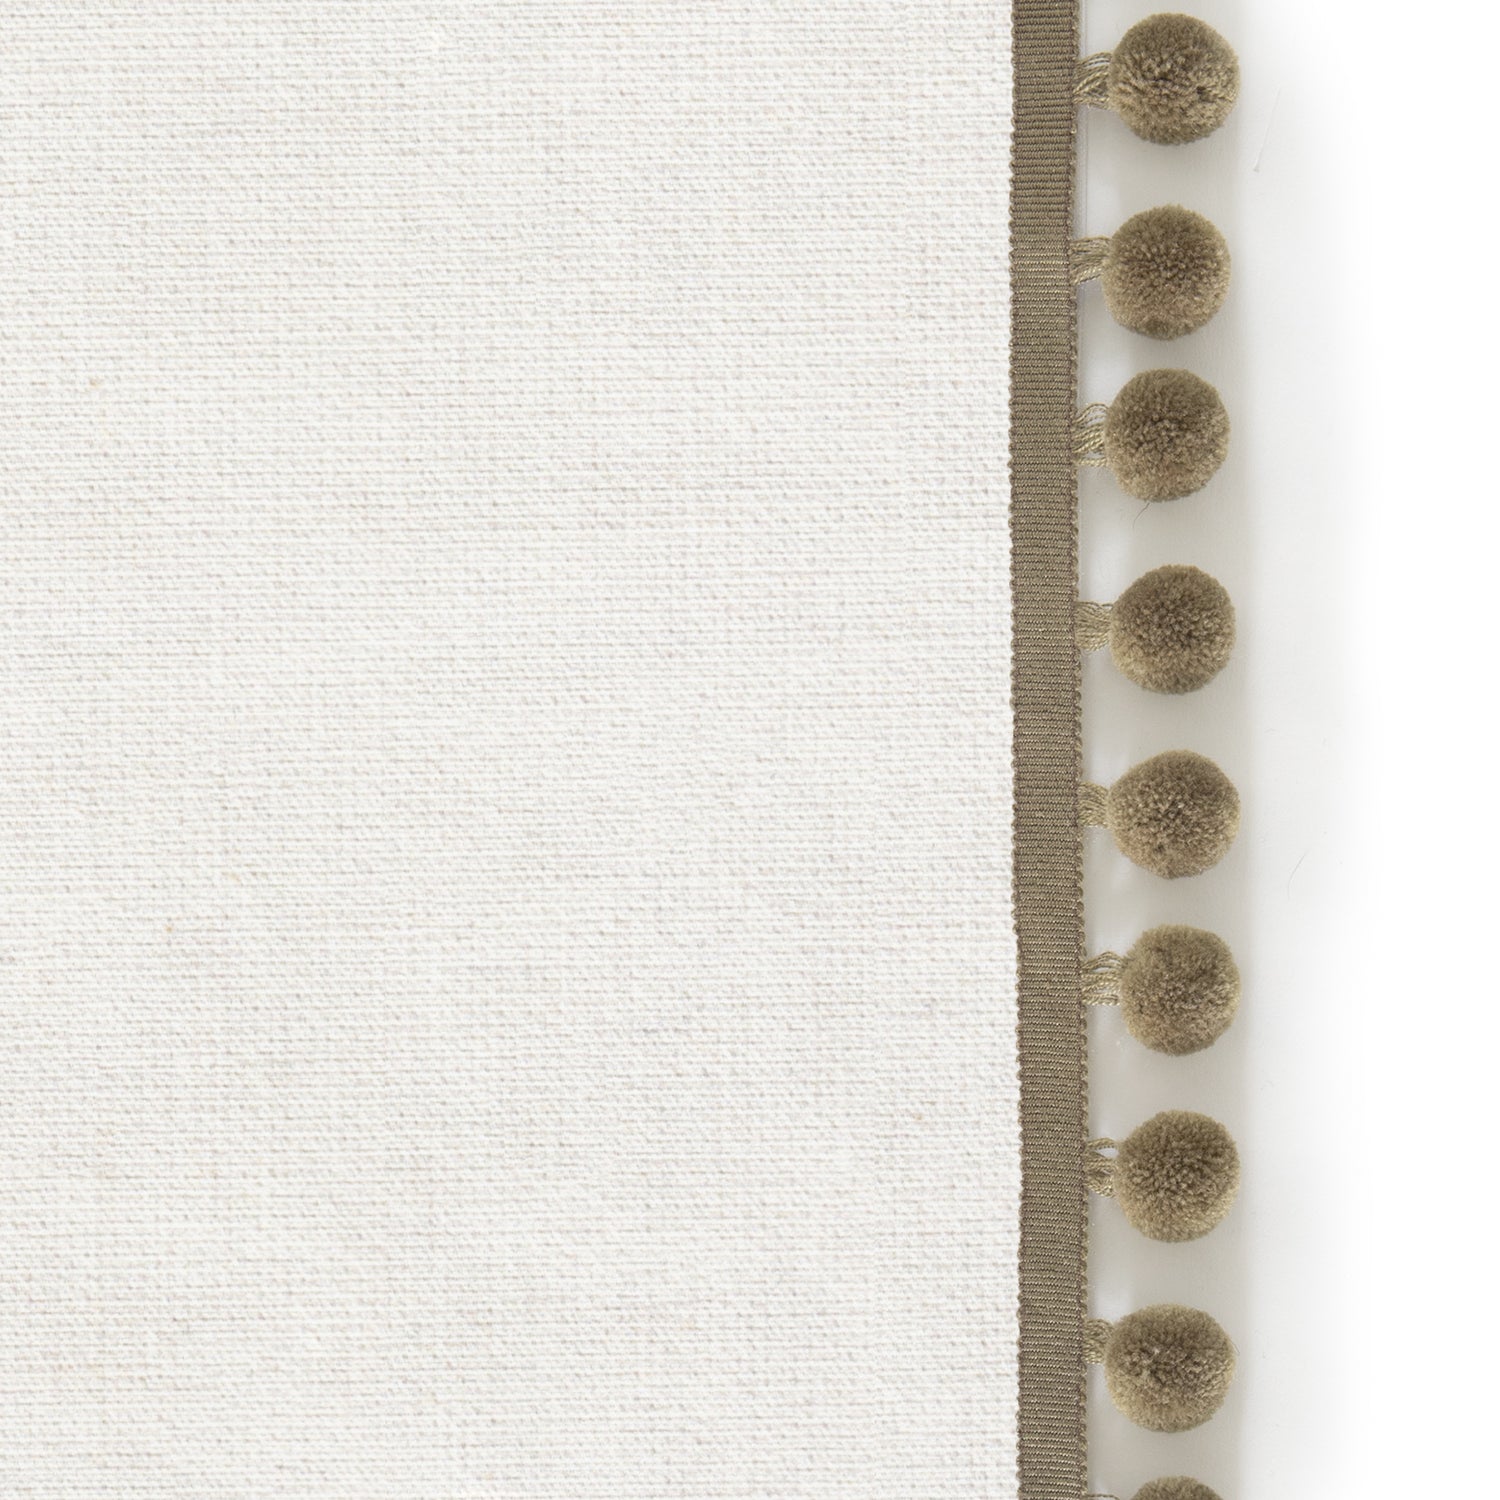 Upclose picture of Flour custom Natural Whiteshower curtain with olive pom pom trim